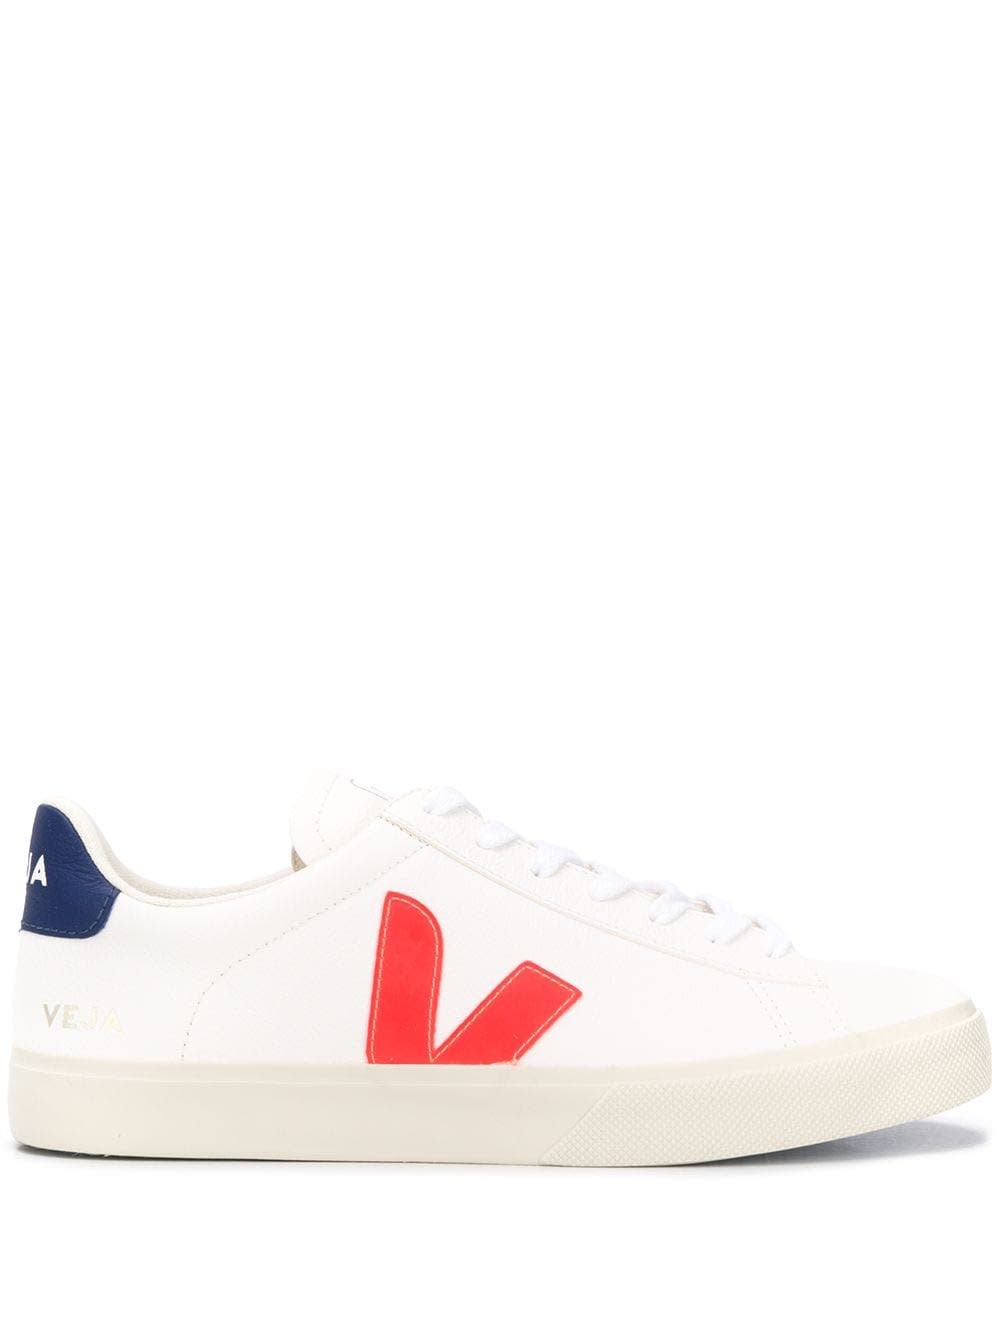 VEJA CAMPO LEATHER SNEAKERS WITH LOGO,11845462